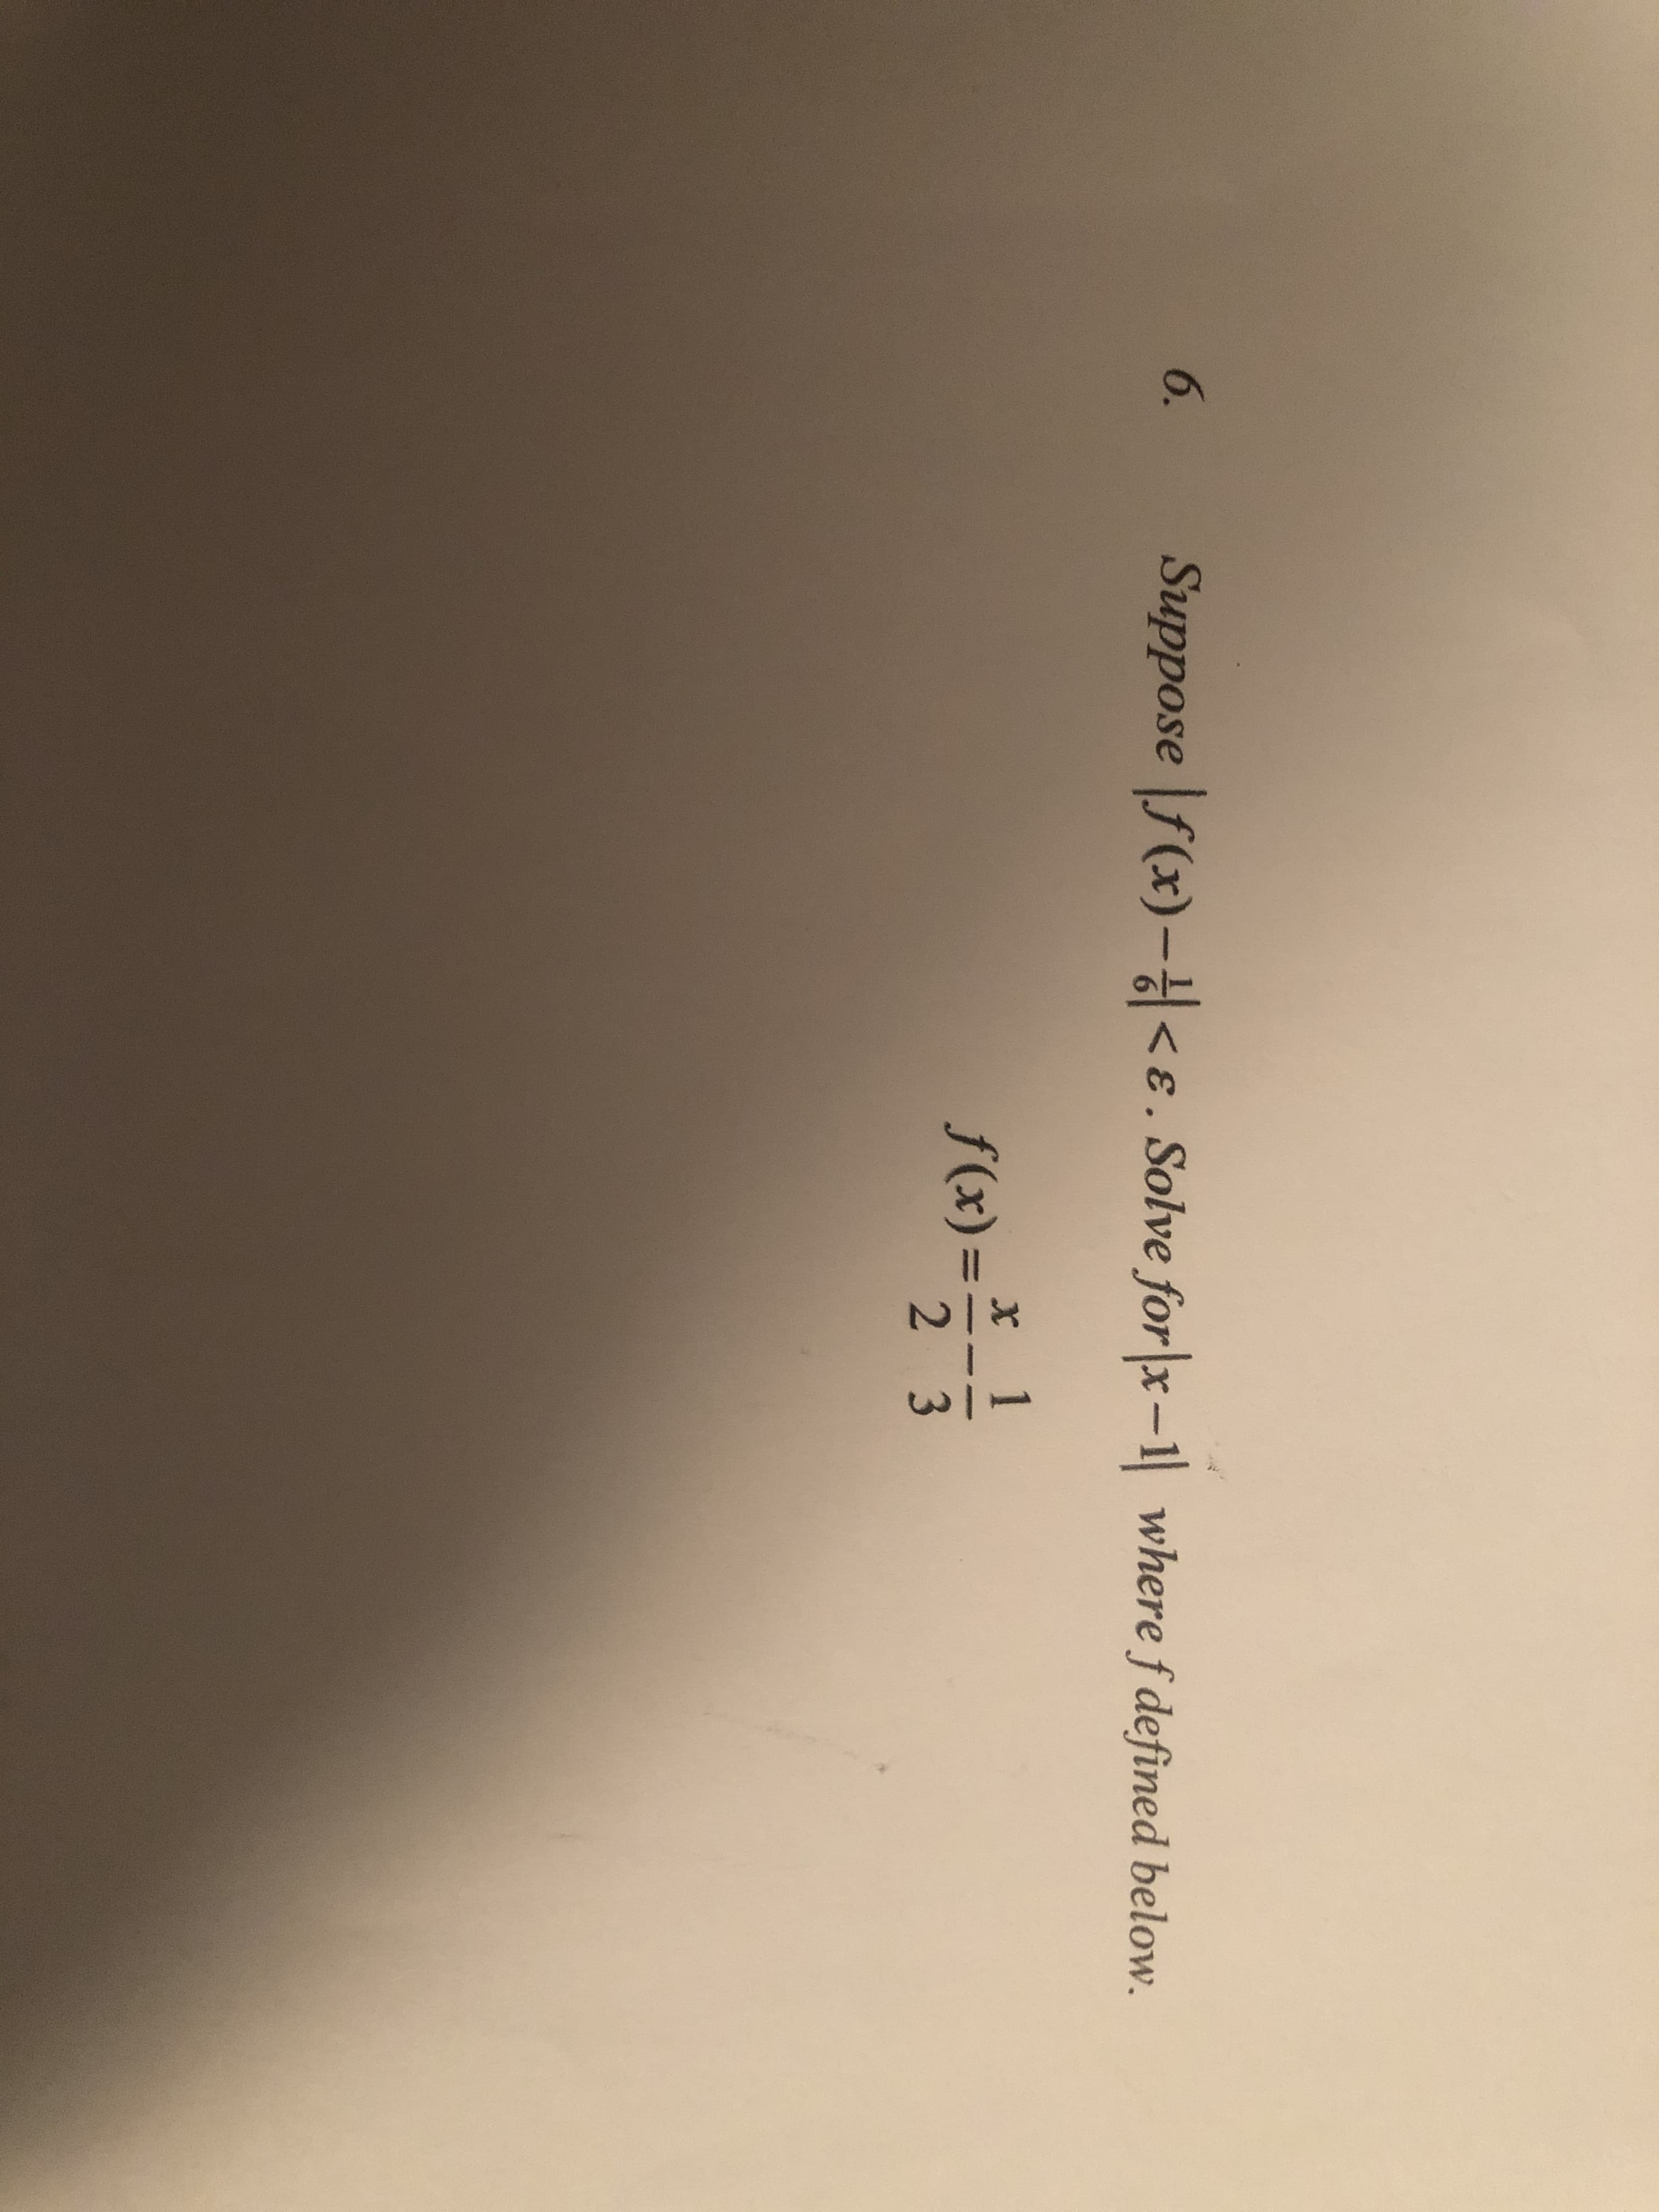 6.
Suppose f(x)-<ɛ. Solve for|x-1 where f defined below.
x 1
f(x) =
2 3
